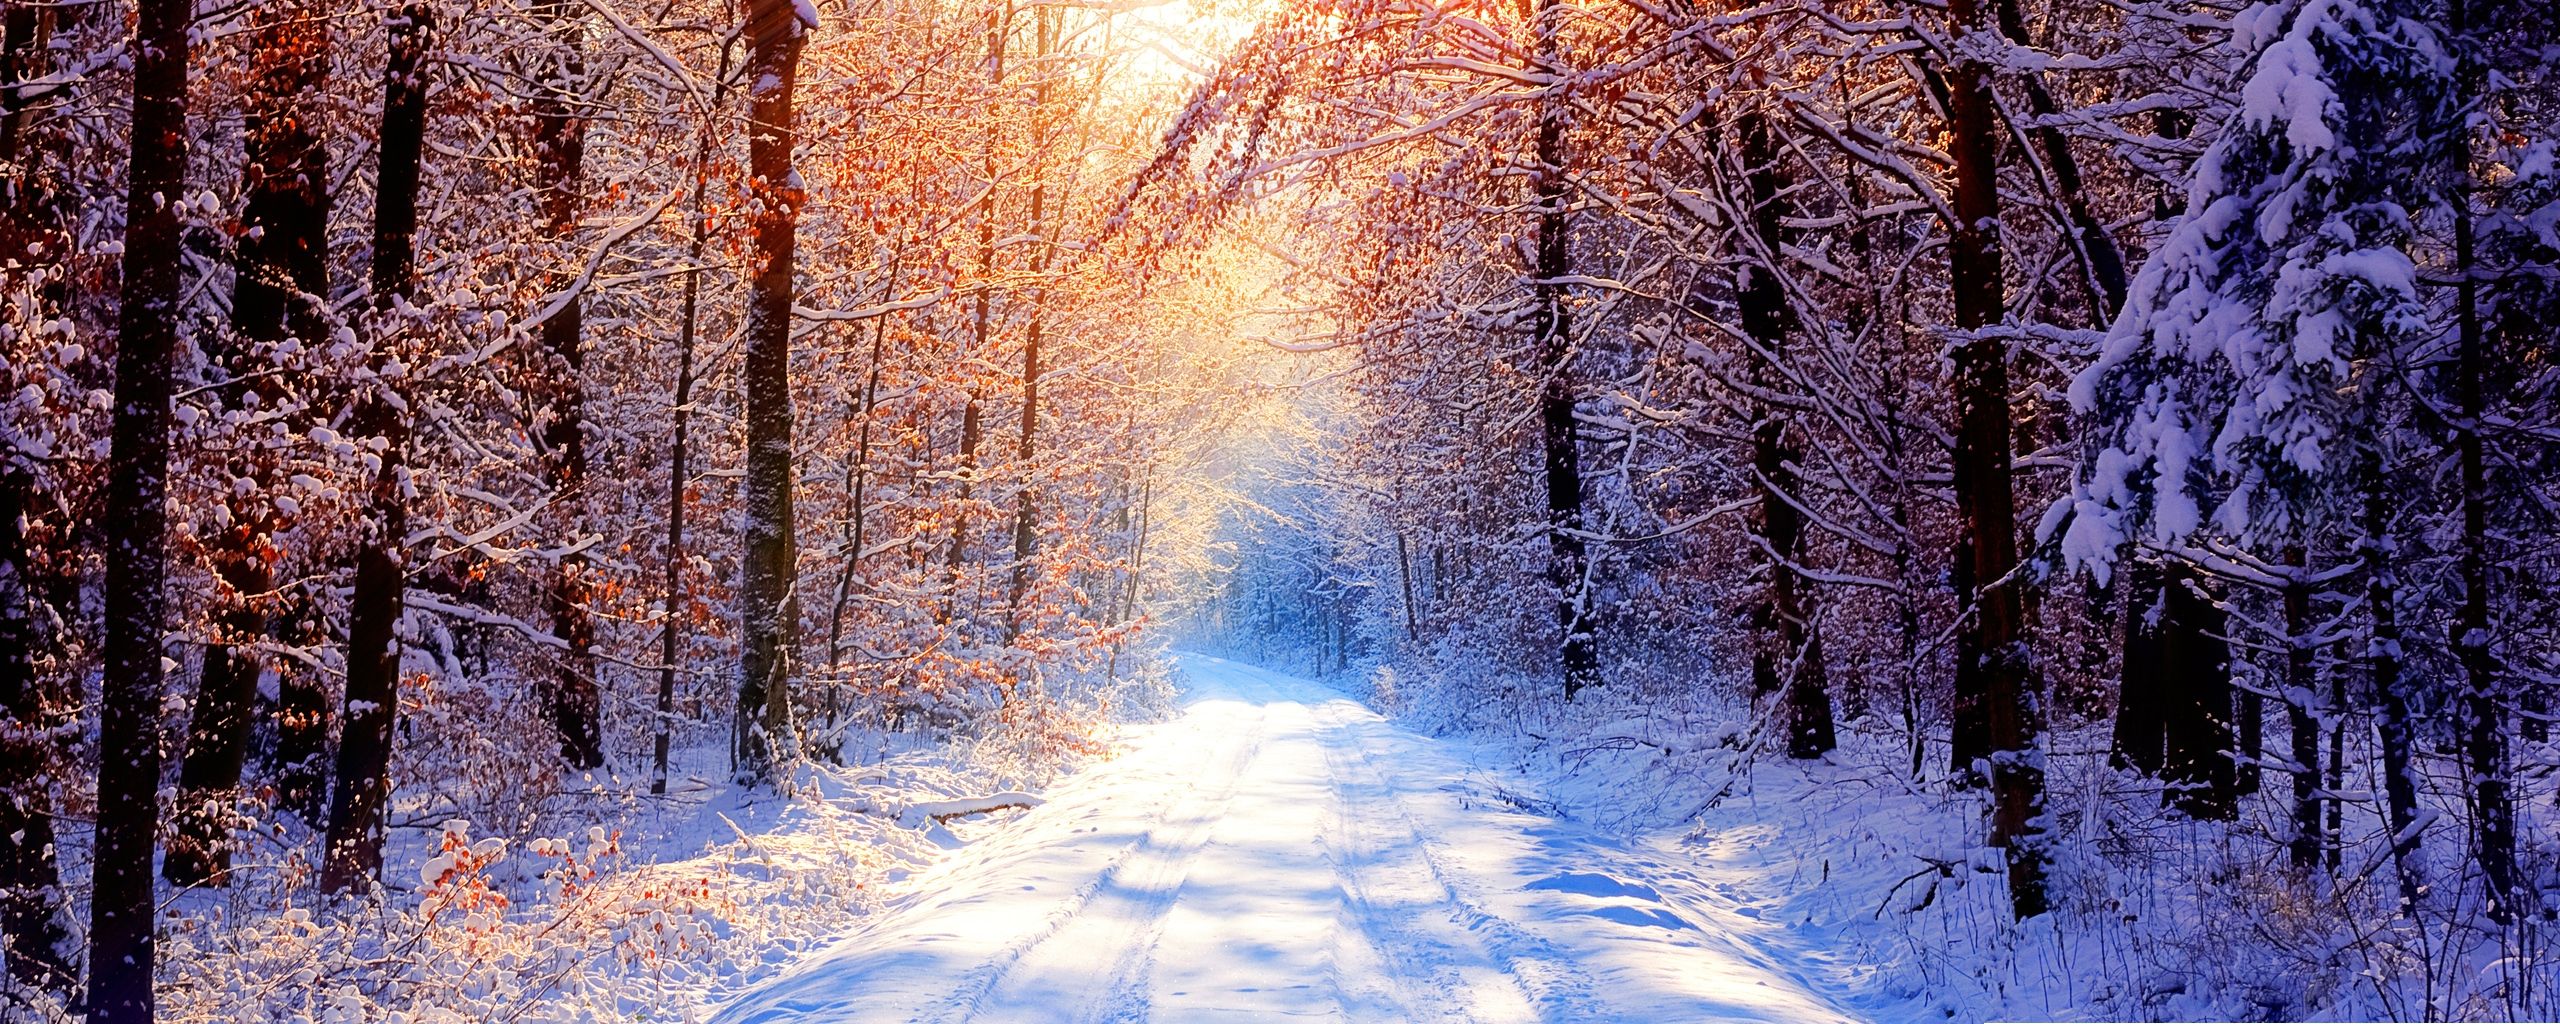 Winter Cover Photos For Facebook Timeline - 2560x1024 Wallpaper 